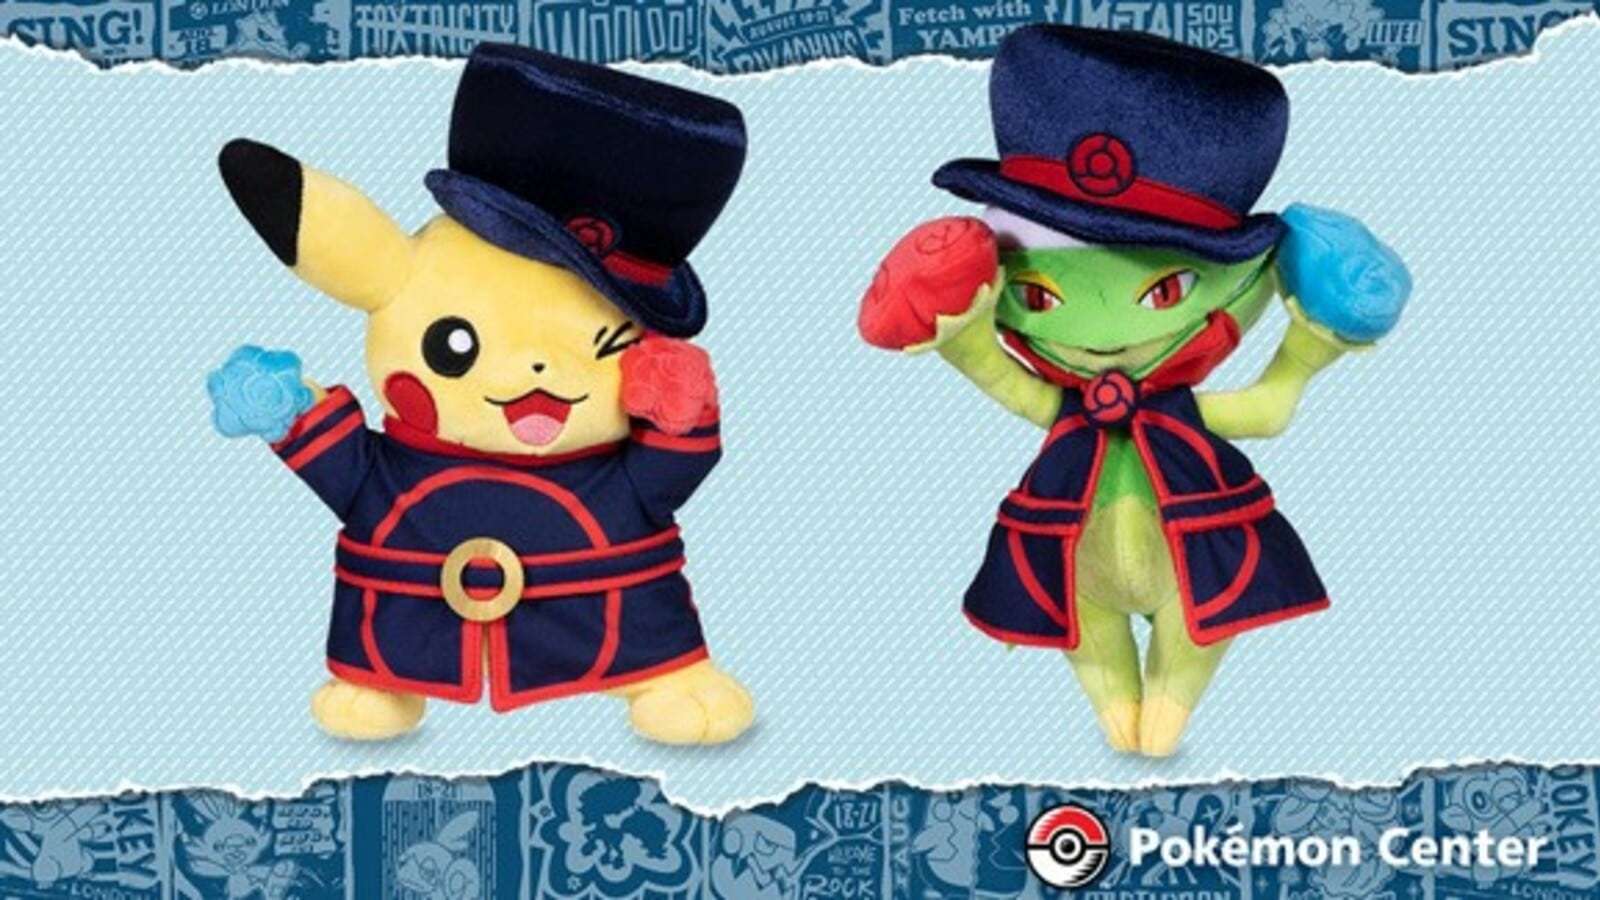 Pokemon Worlds Championship Beefeater Pikachu Scalped After Selling Out